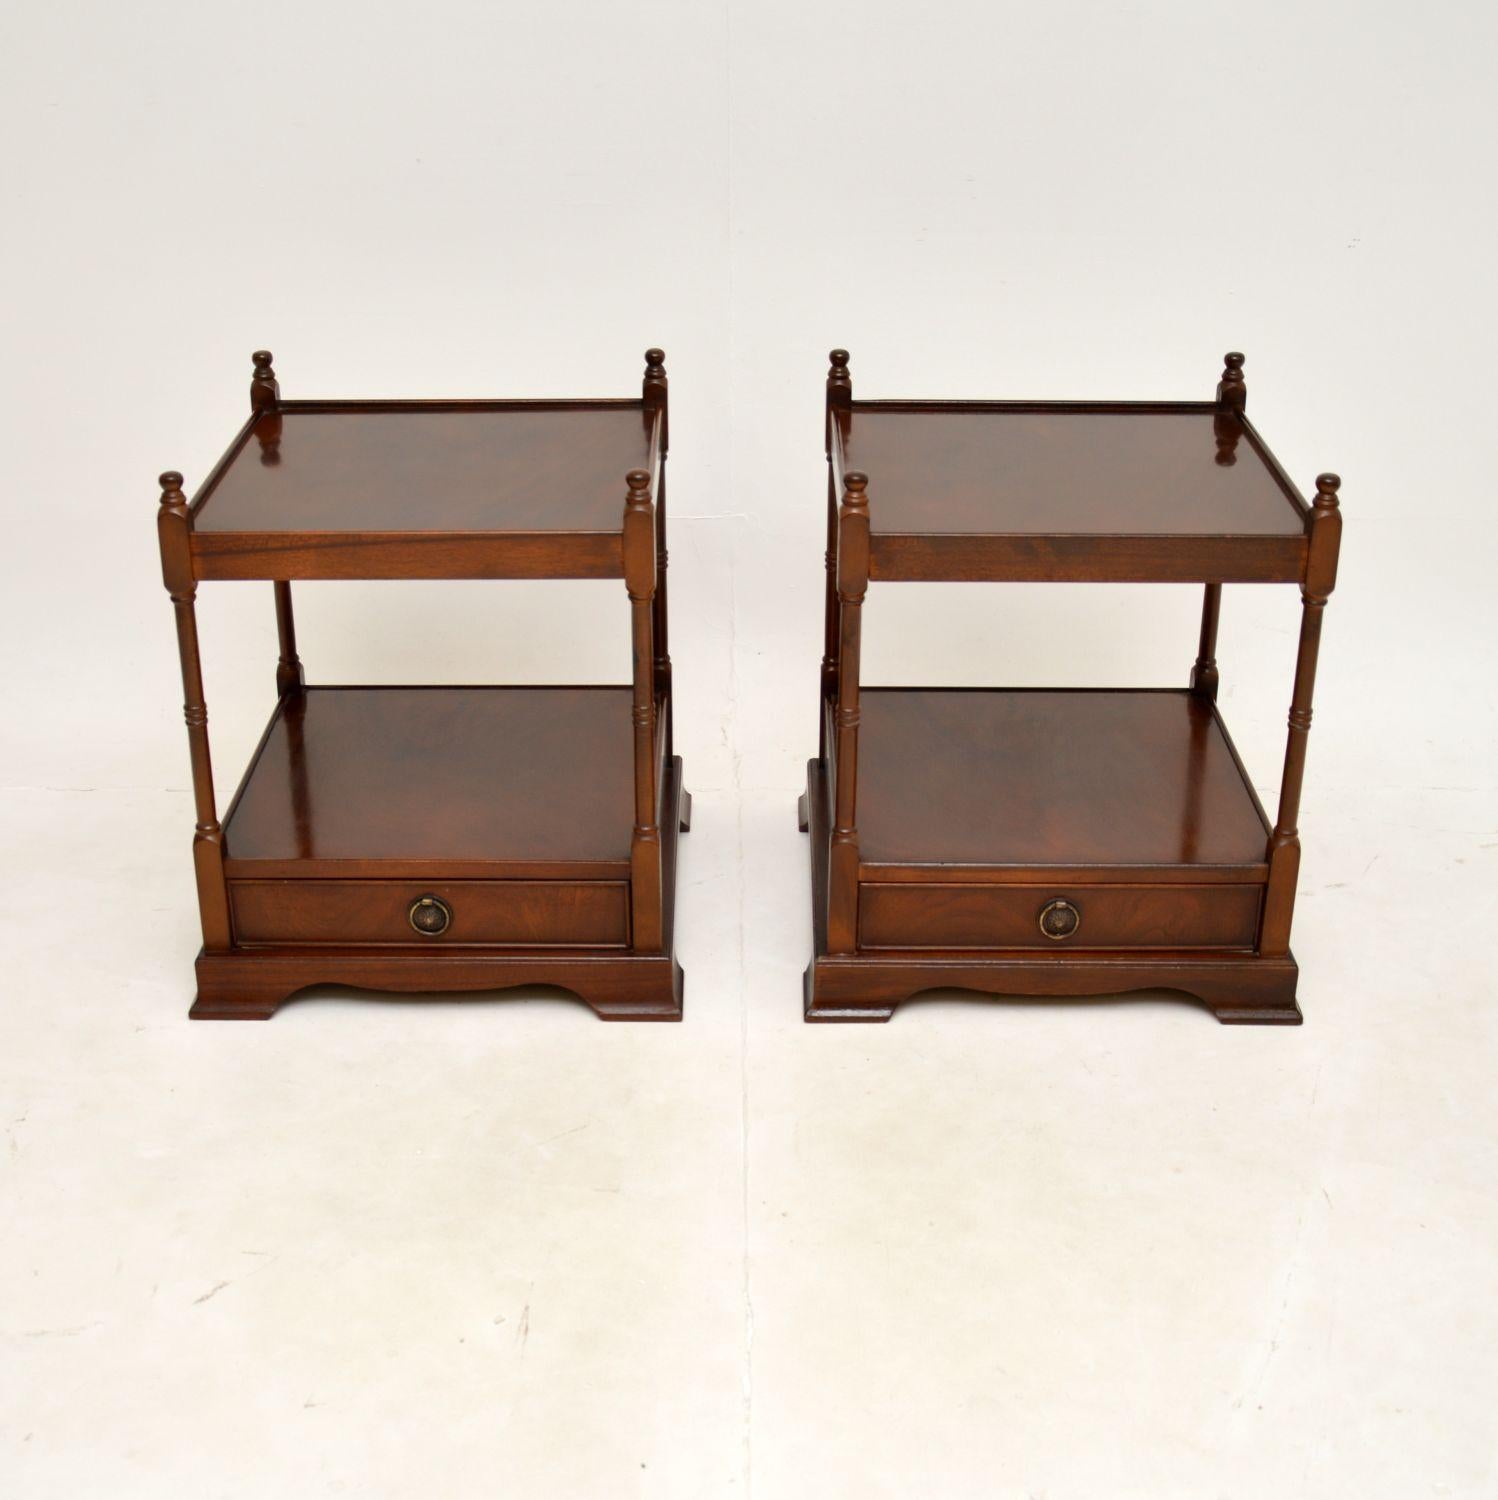 A charming pair of antique Georgian style side tables. They were made in England, they date from around the 1950-60’s.

The quality is excellent, they are nicely designed and are a very useful size to be used as occasional side tables or even as